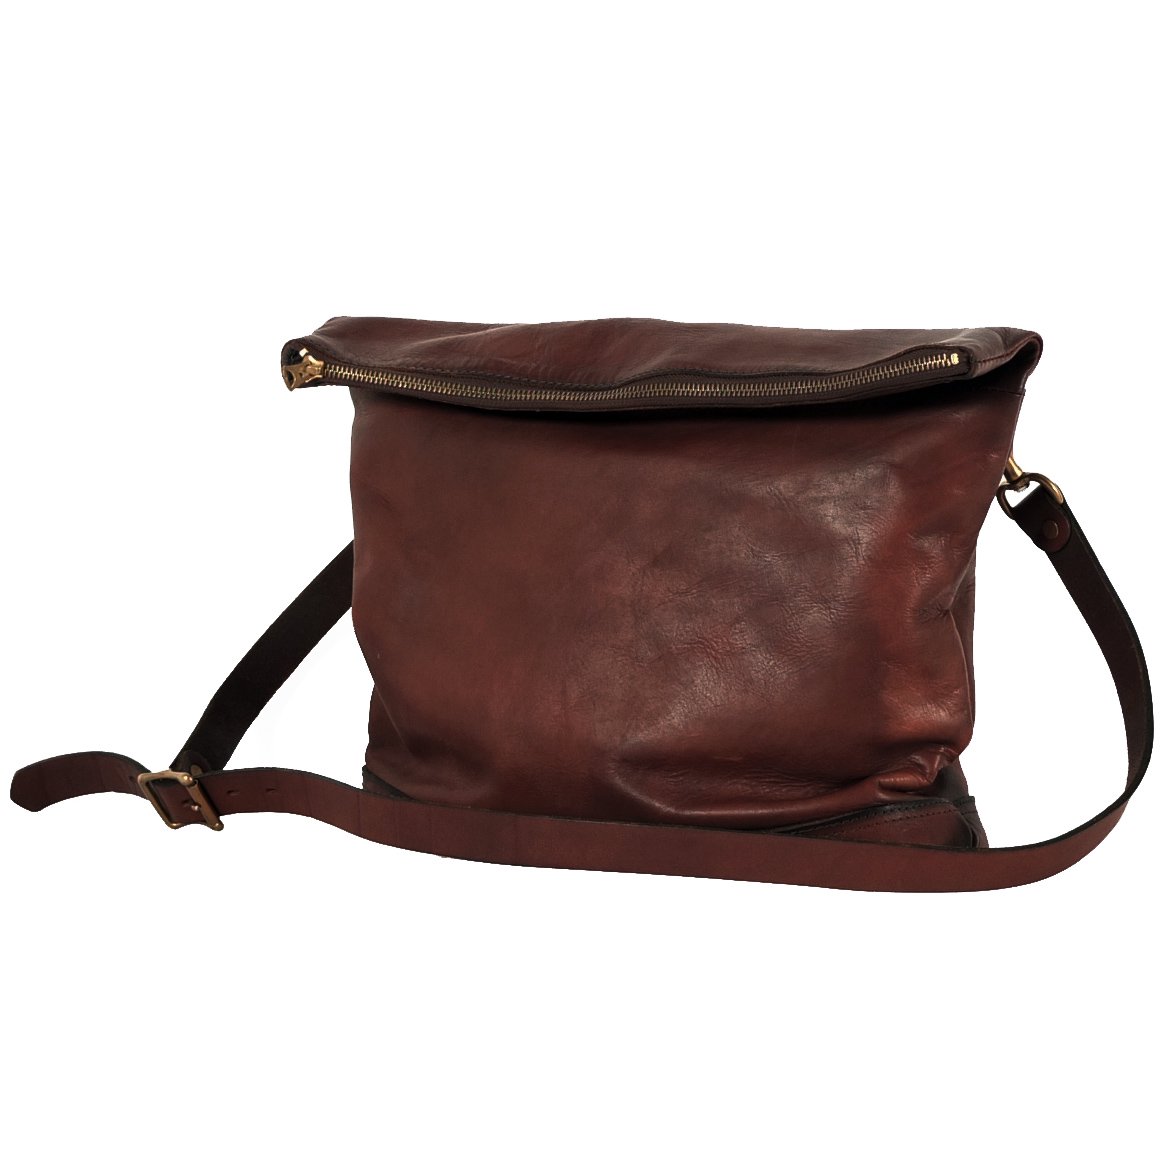 LEATHER NELSON 2WAY BAG-SMALL - VASCO ONLINE STORE